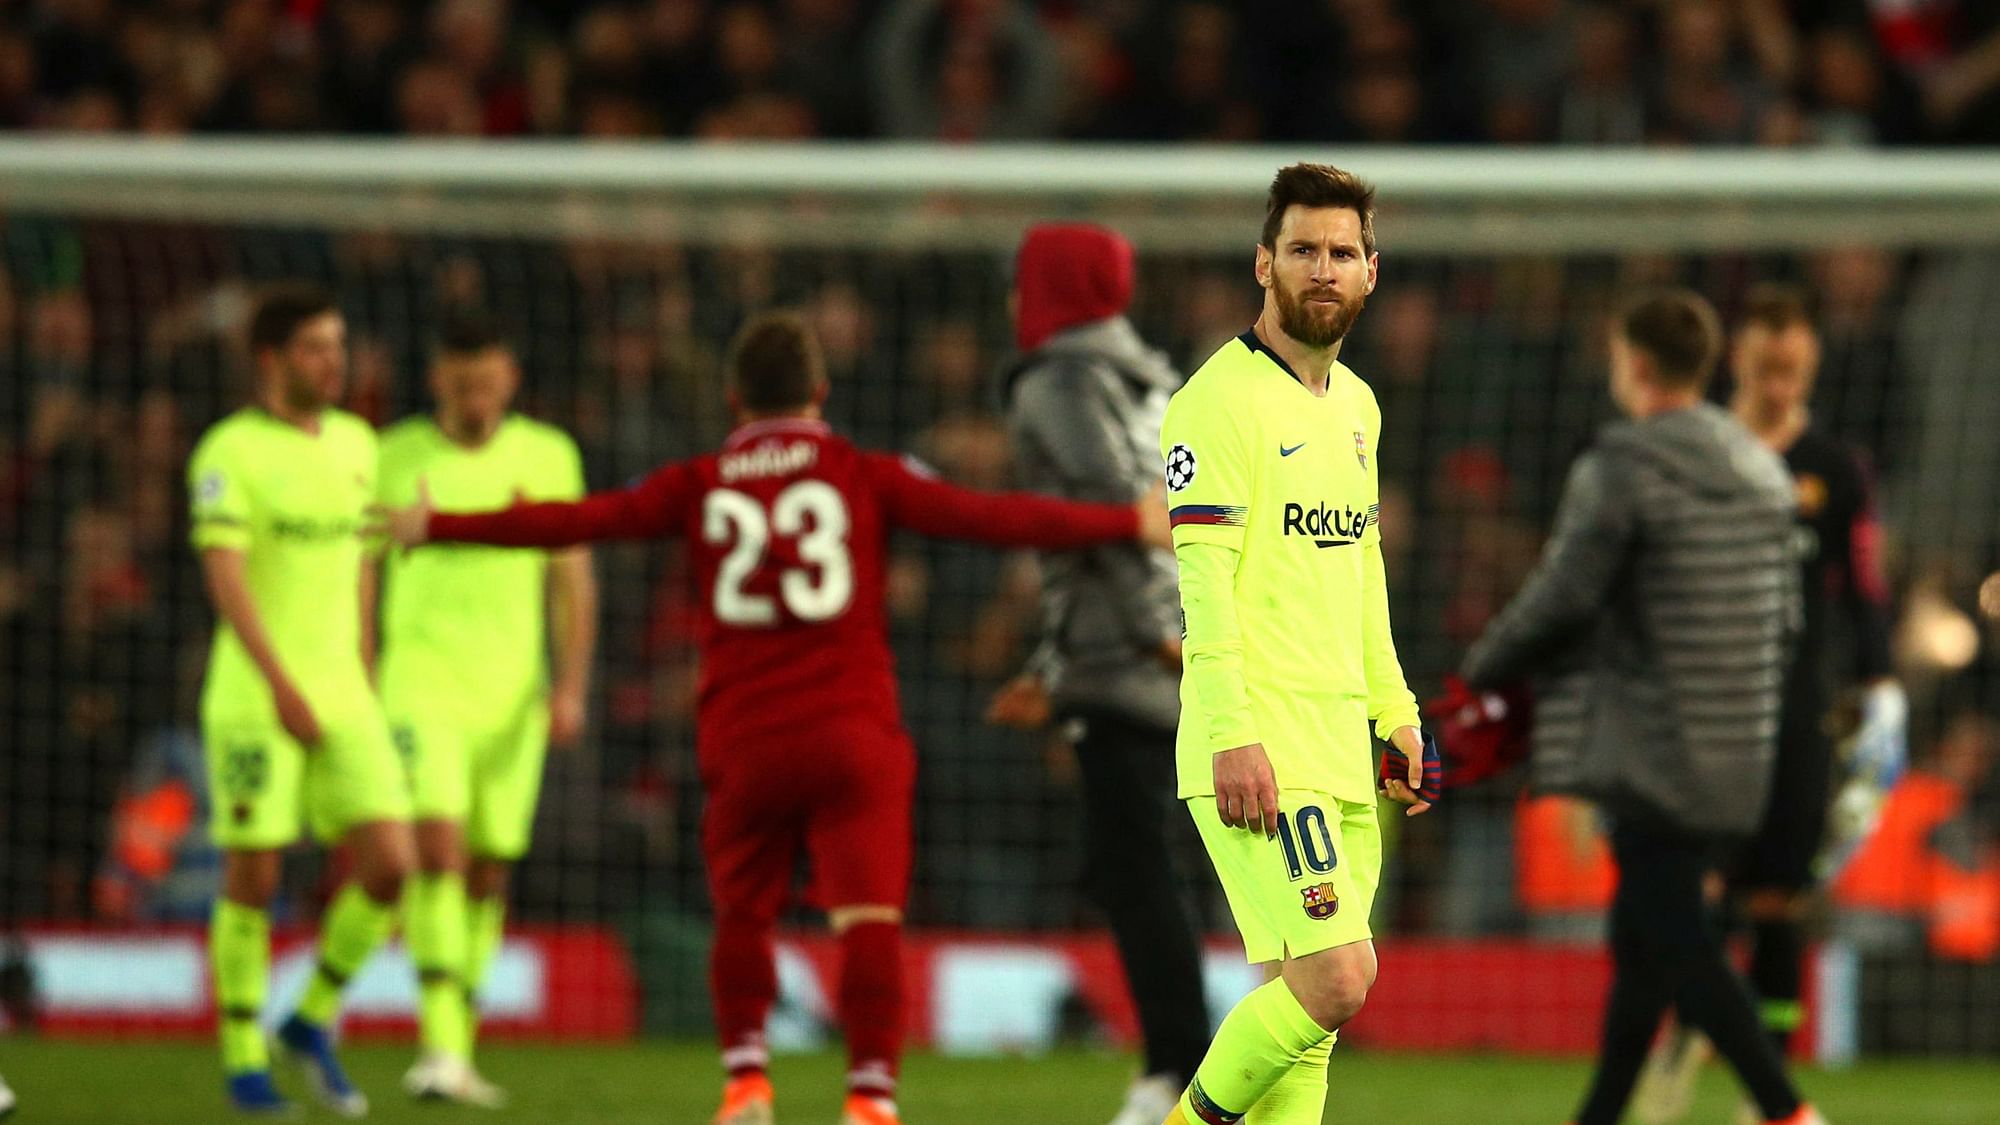 Barcelona’s Lionel Messi leaves the playing field after losing the Champions League semifinal, second leg, soccer match against Liverpool at the Anfield stadium in Liverpool, England, Tuesday, May 7, 2019.&nbsp;